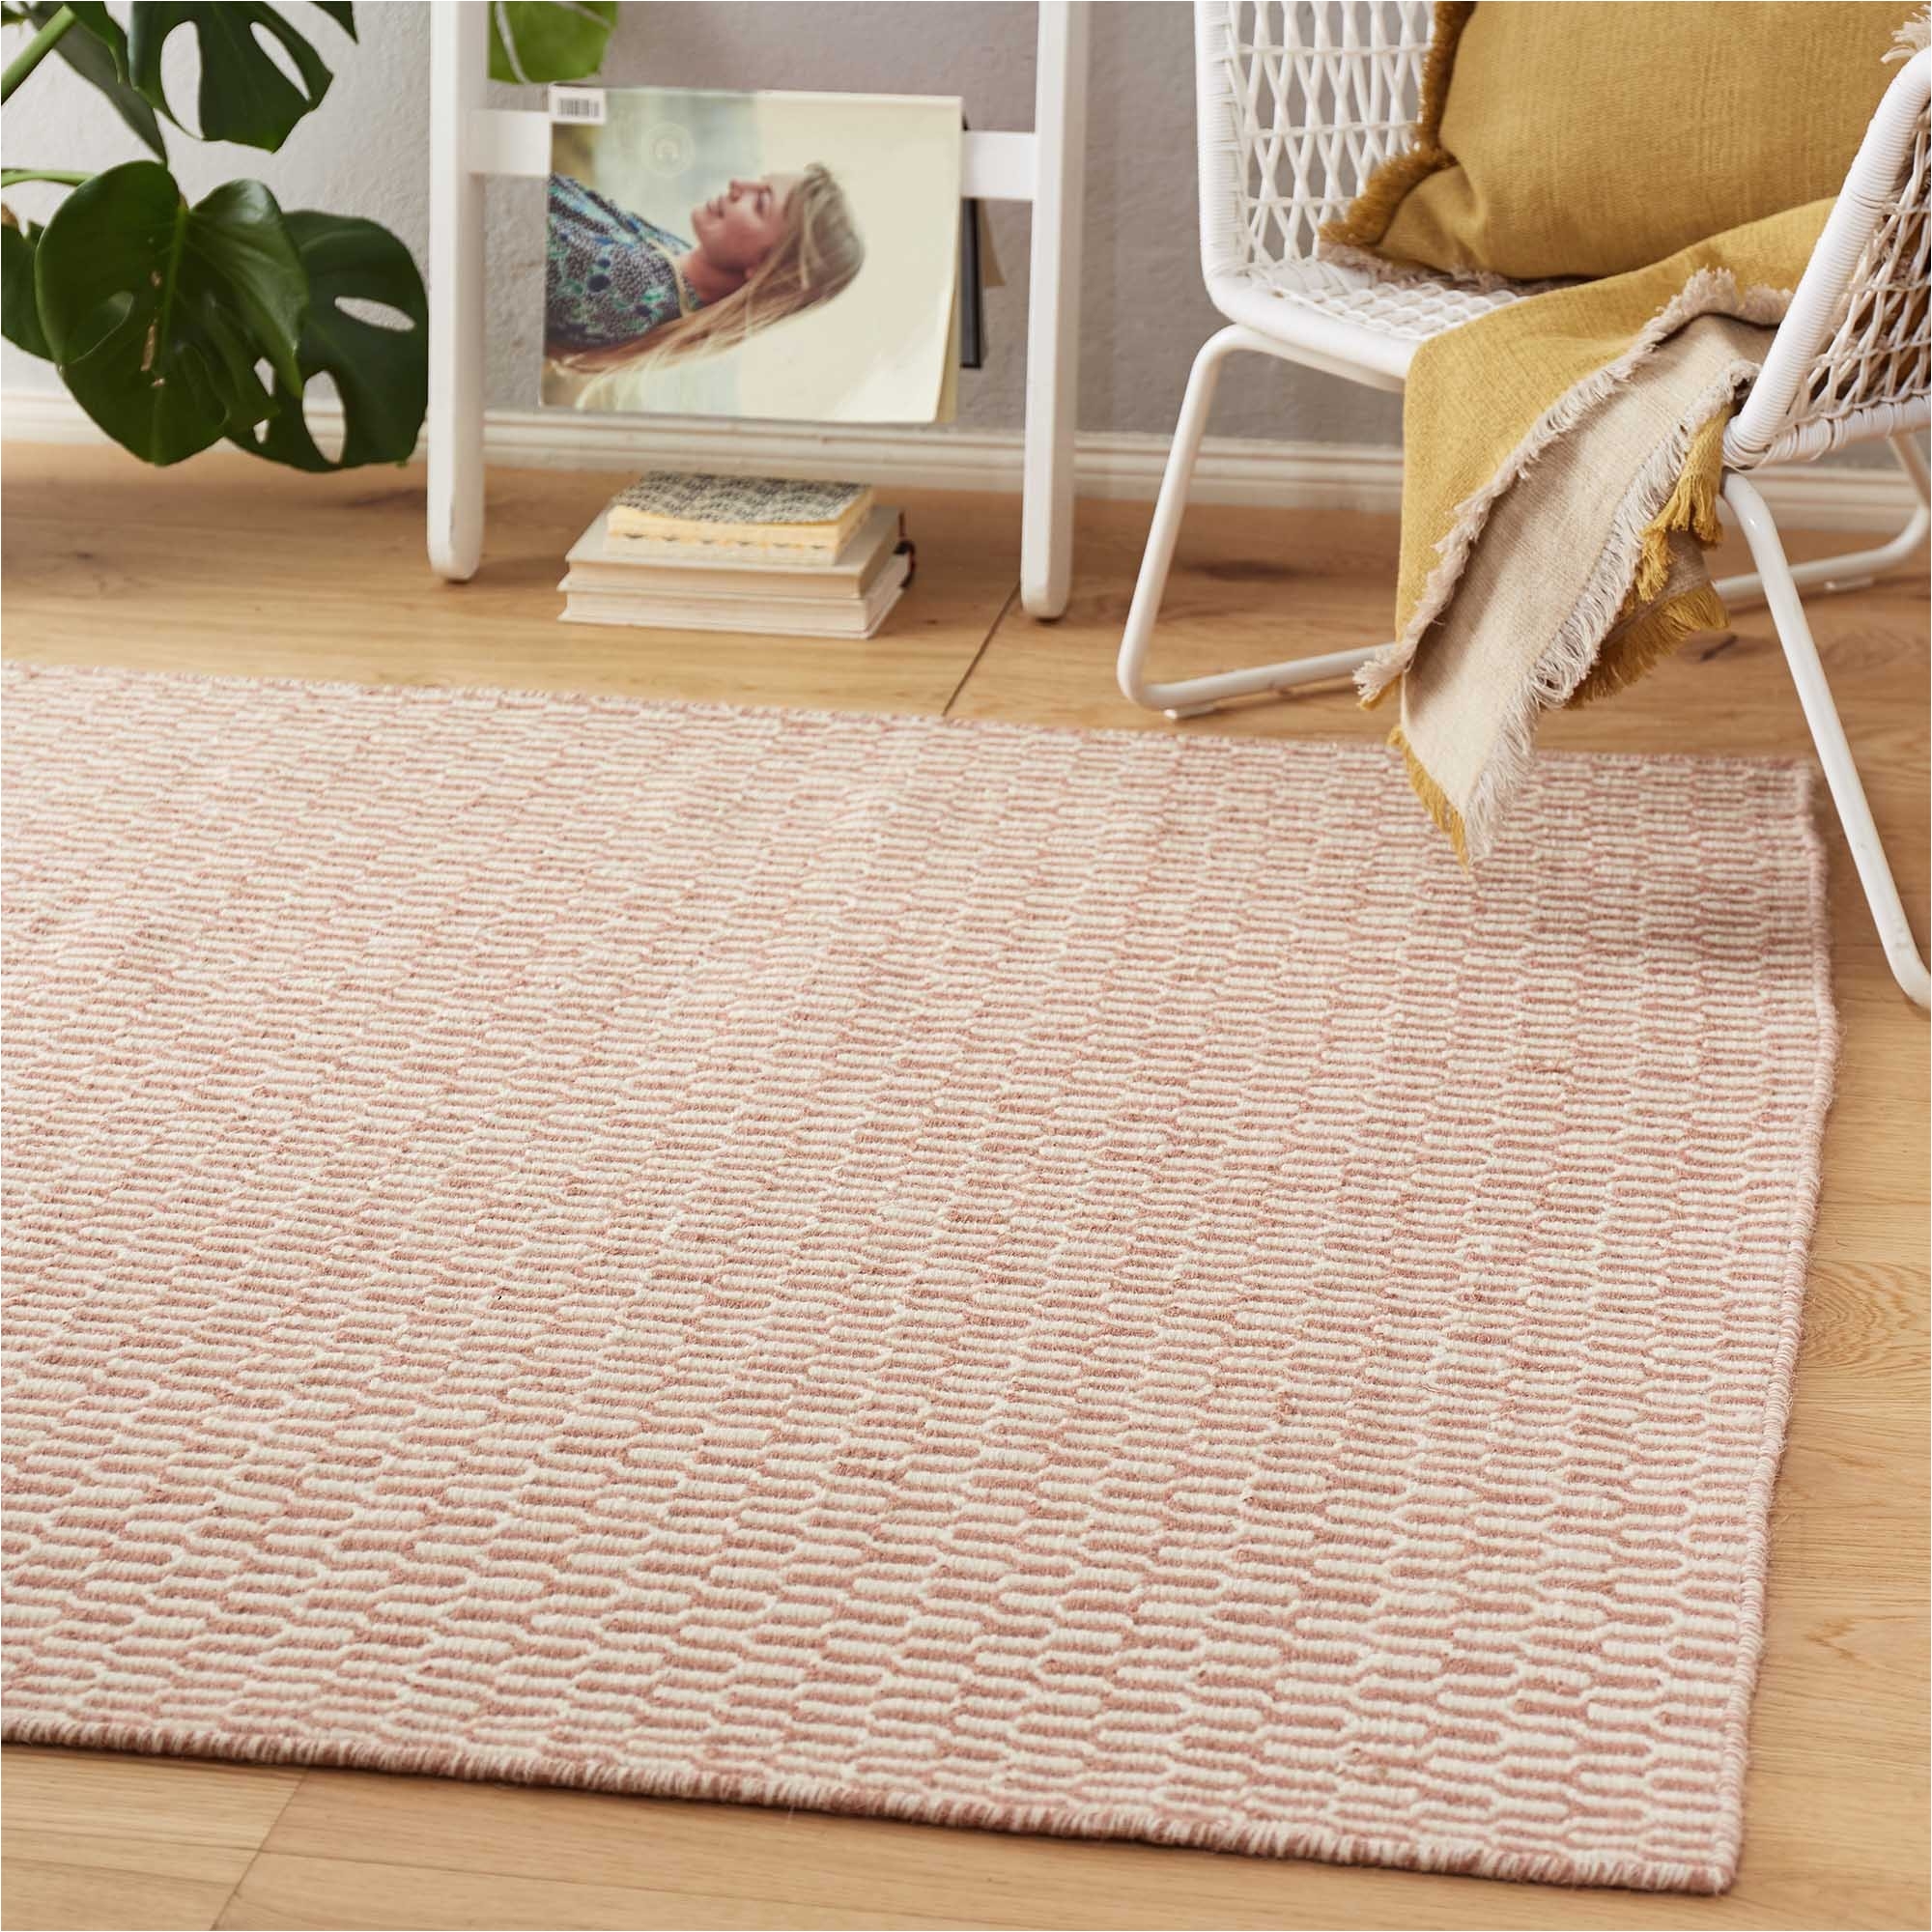 Pink Throw Rug Target Overod Rug Dusty Pink Amp Off White Geometric Design